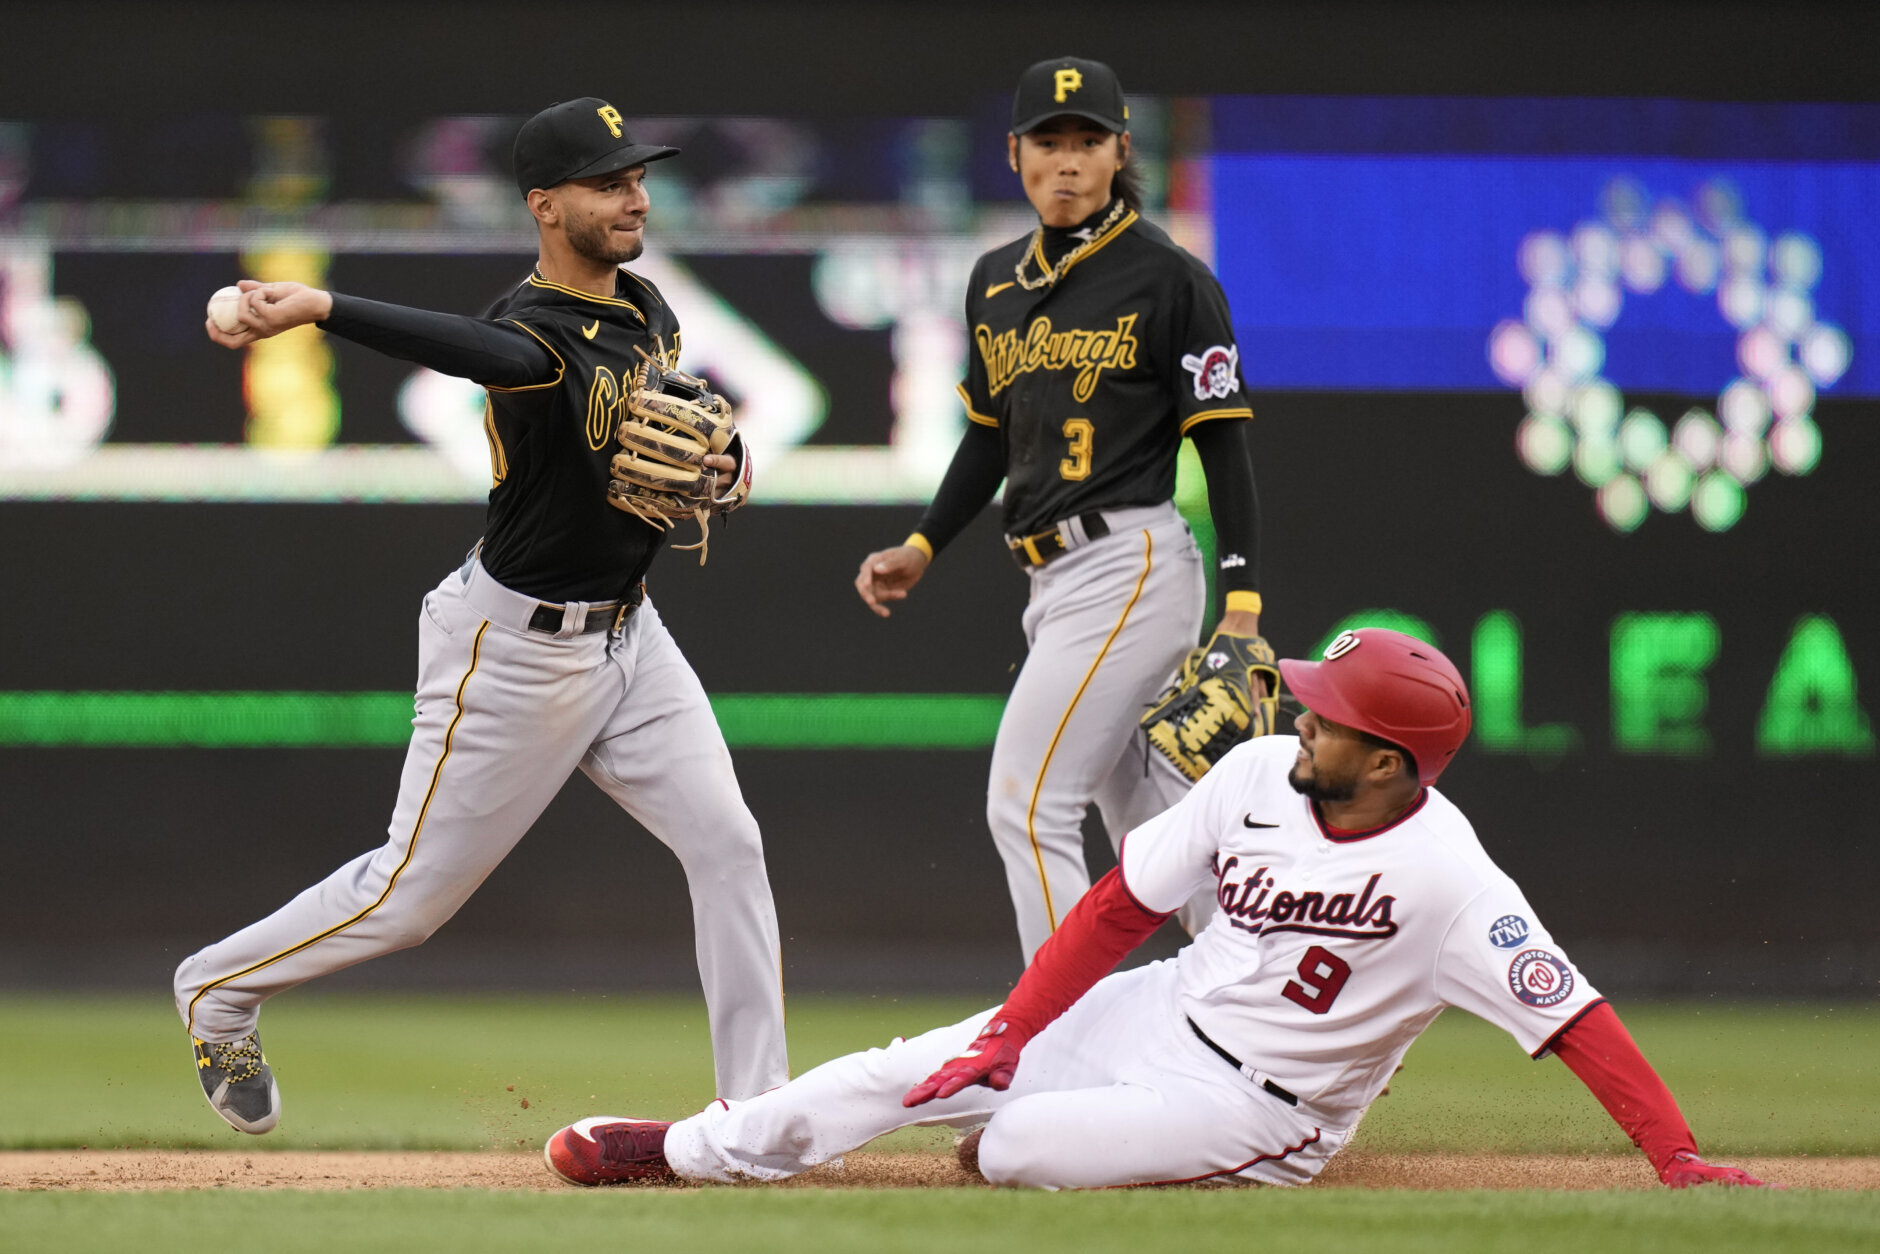 Pirates overcome rain delay, use 8 pitchers to top St. Louis